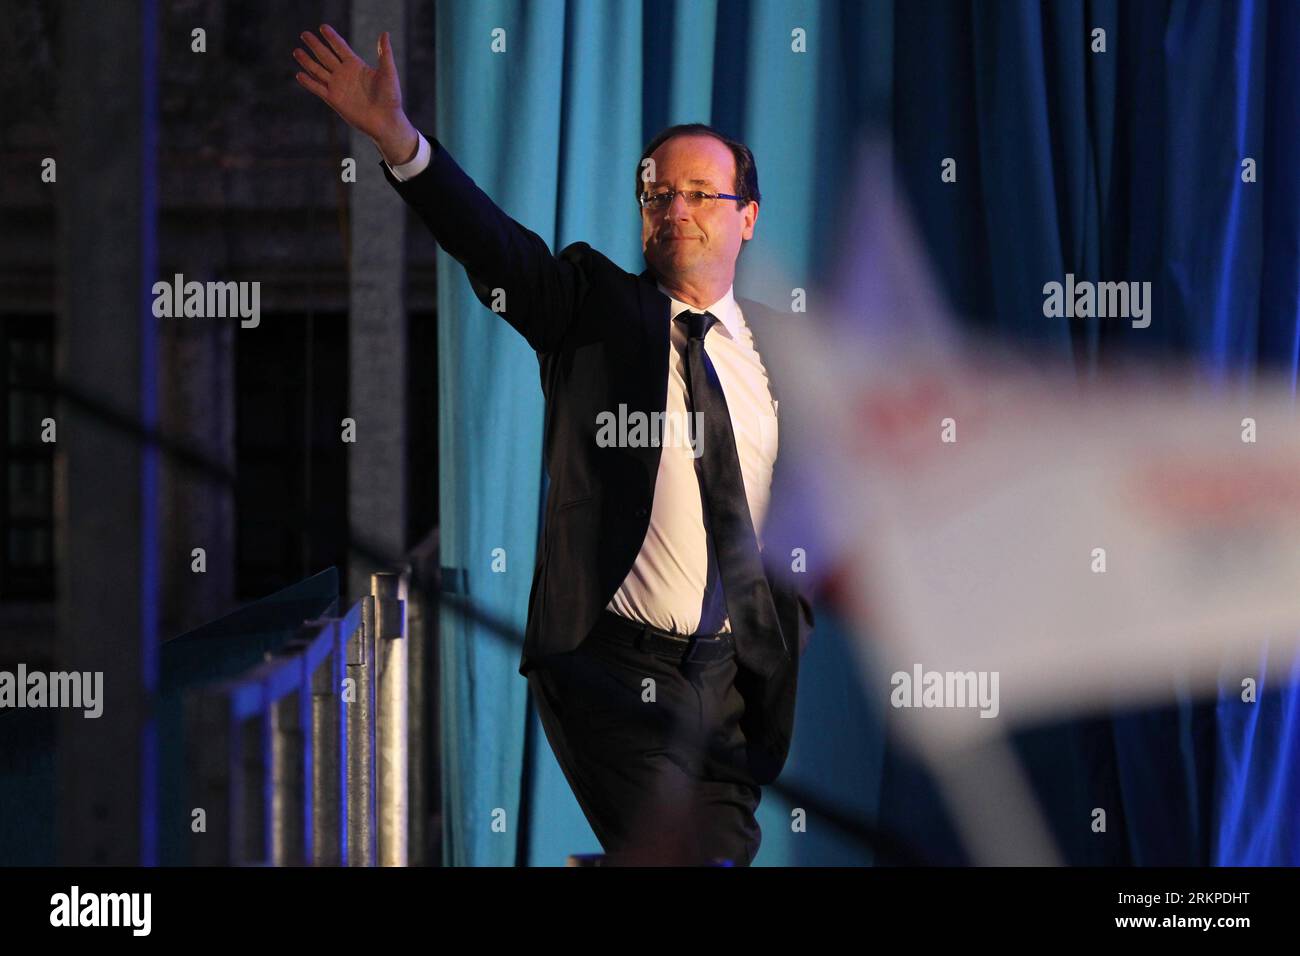 Bildnummer: 57962360  Datum: 06.05.2012  Copyright: imago/Xinhua (120506) -- TULLE, May 6, 2012 (Xinhua) -- France s Socialist Party s candidate Francois Hollande waves to supporters after he defeated incumbent French President Nicolas Sarkozy in Sunday s decisive presidential runoff, in Tulle, southern France, May 6, 2012. Francois Hollande said he feels proud of bringing hope to France and that change will start from now in an address to his supporters on Sunday night after the presidential election. (Xinhua/Gao Jing) (zx) FRANCE-TULLE-HOLLANDE-VICTORY PUBLICATIONxNOTxINxCHN People Politik W Stock Photo